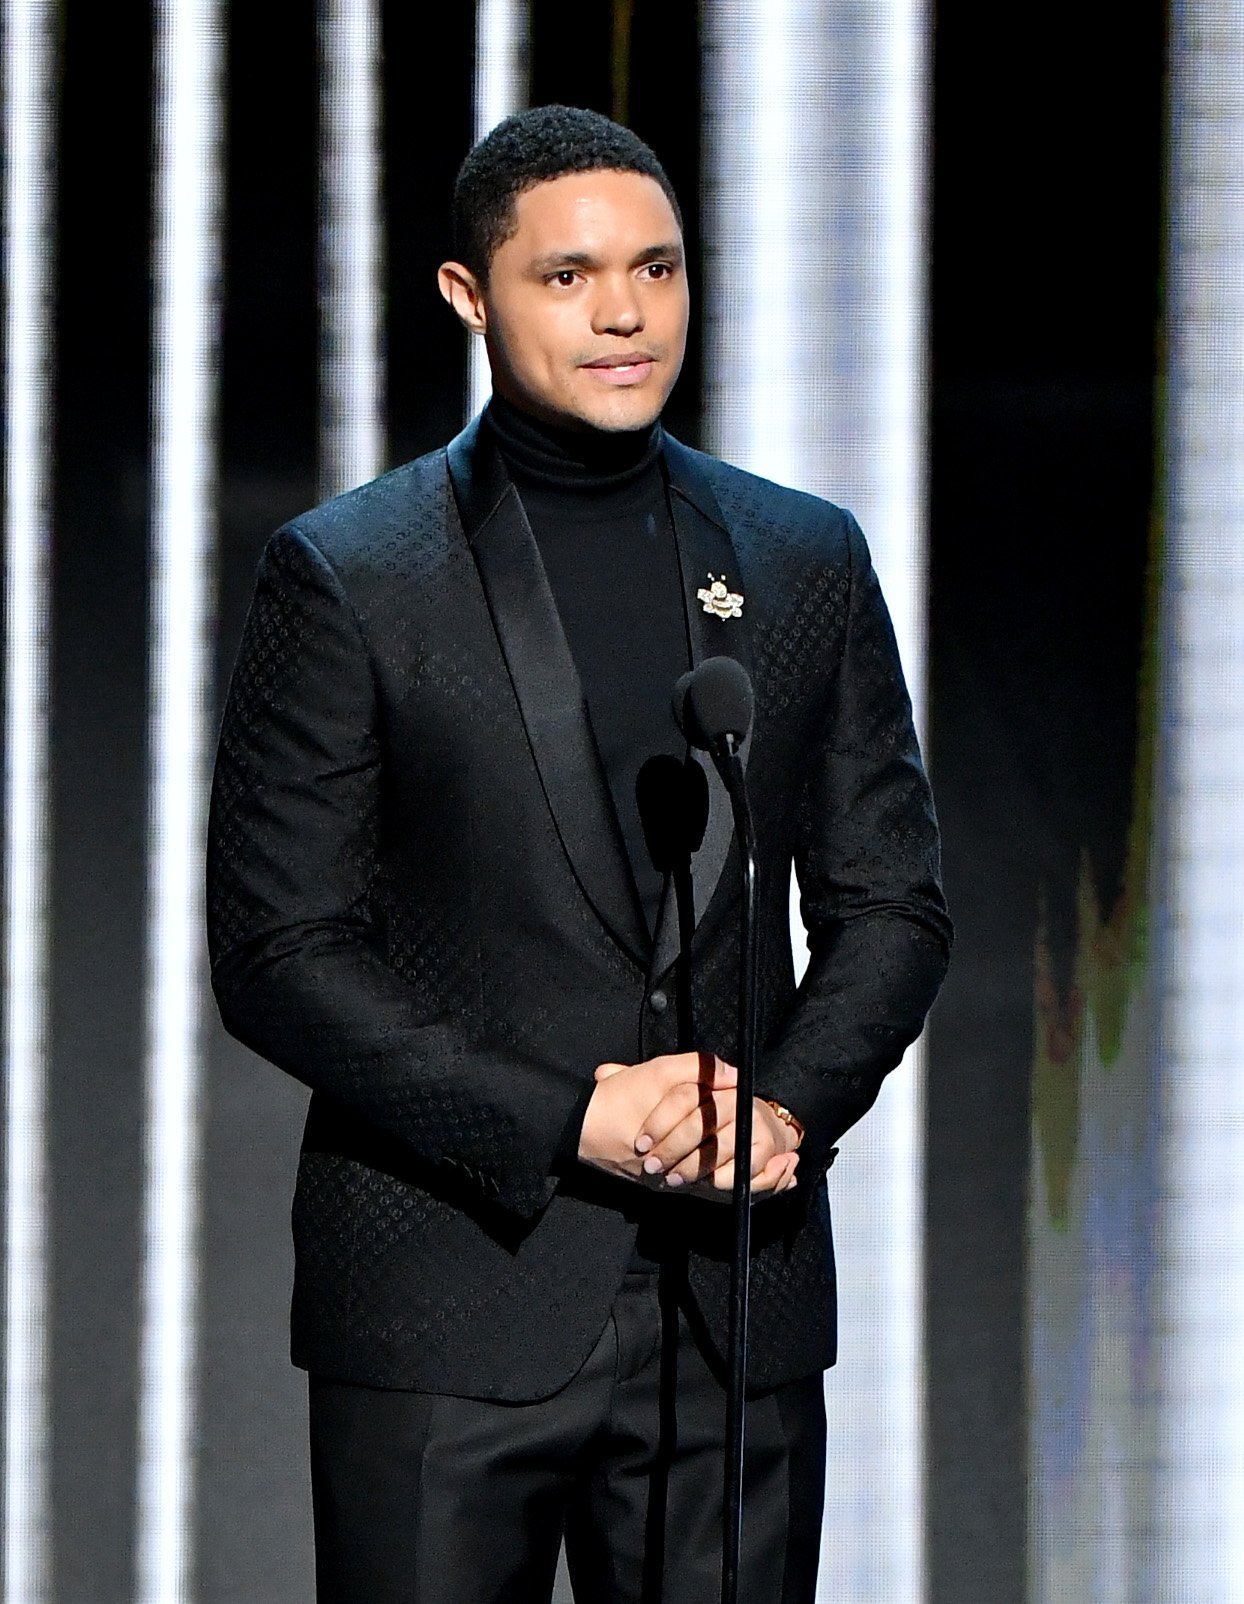 Trevor Noah during the 50th NAACP Image Awards at Dolby Theatre on March 30, 2019 in Hollywood. | Source: Getty Images